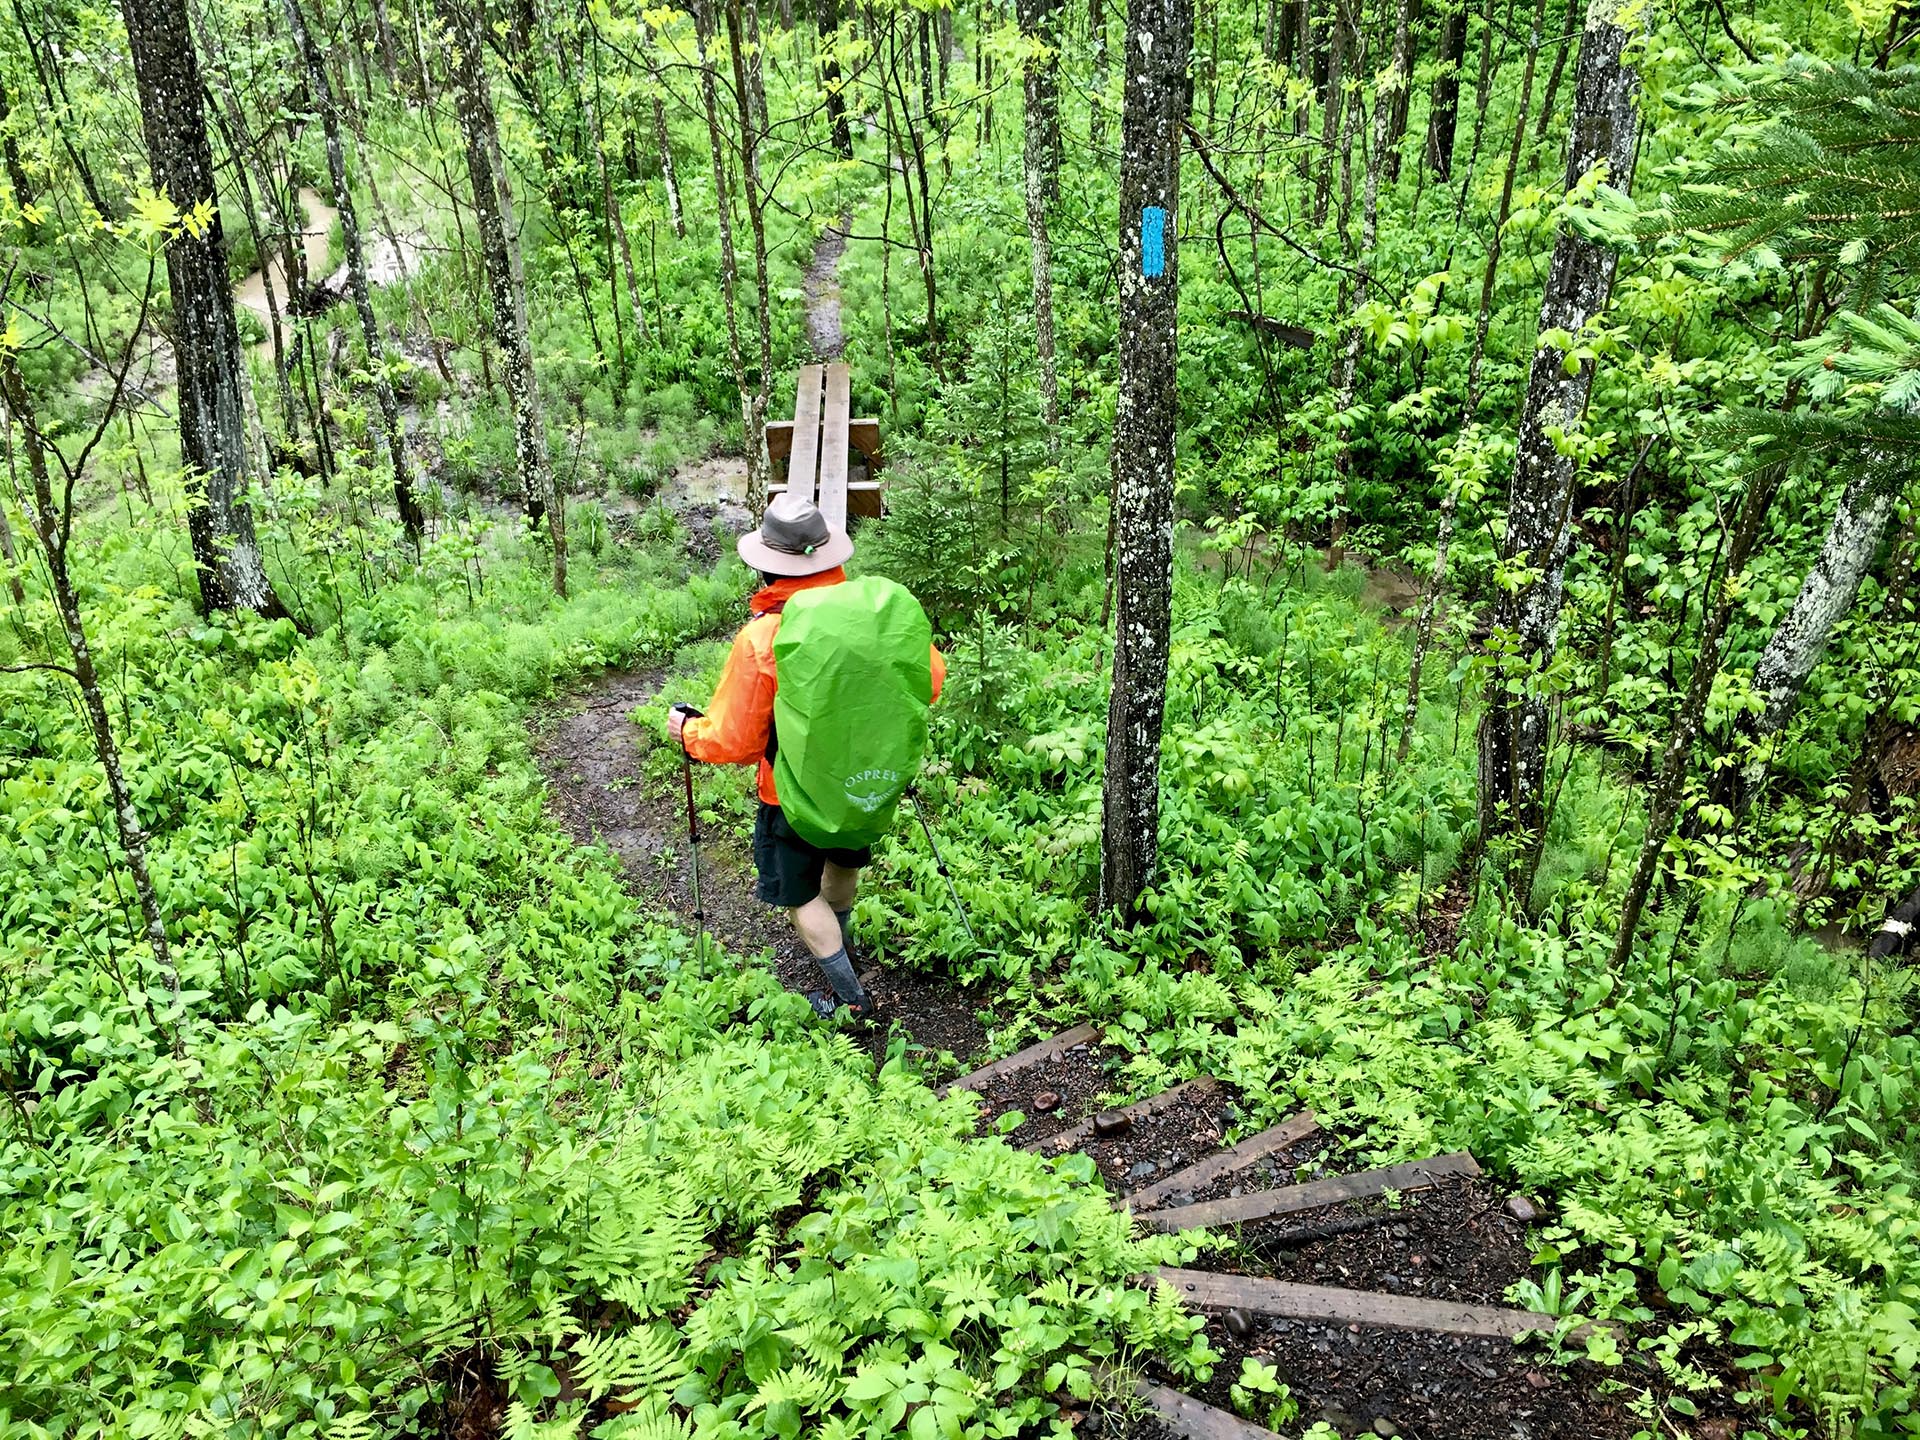 View of backpacker on trail winding through very green forest, taken by The Thousand-Miler.